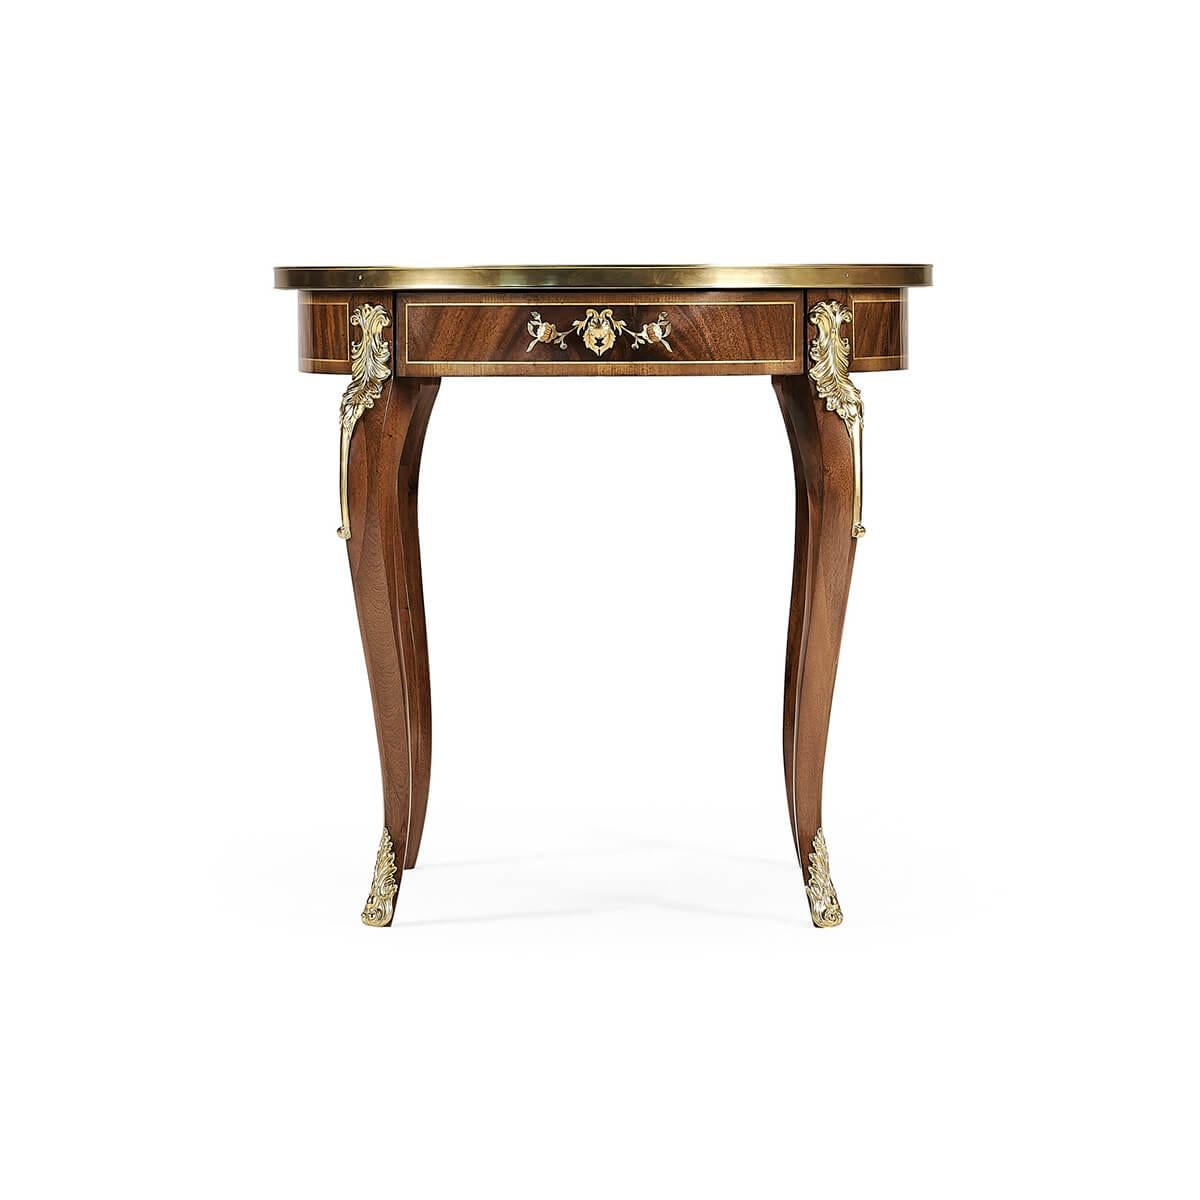 French Louis XV style mother-of-pearl inlaid marquetry round end table with brass trim and mounts, single drawer on cabriole legs.
Dimensions: 26